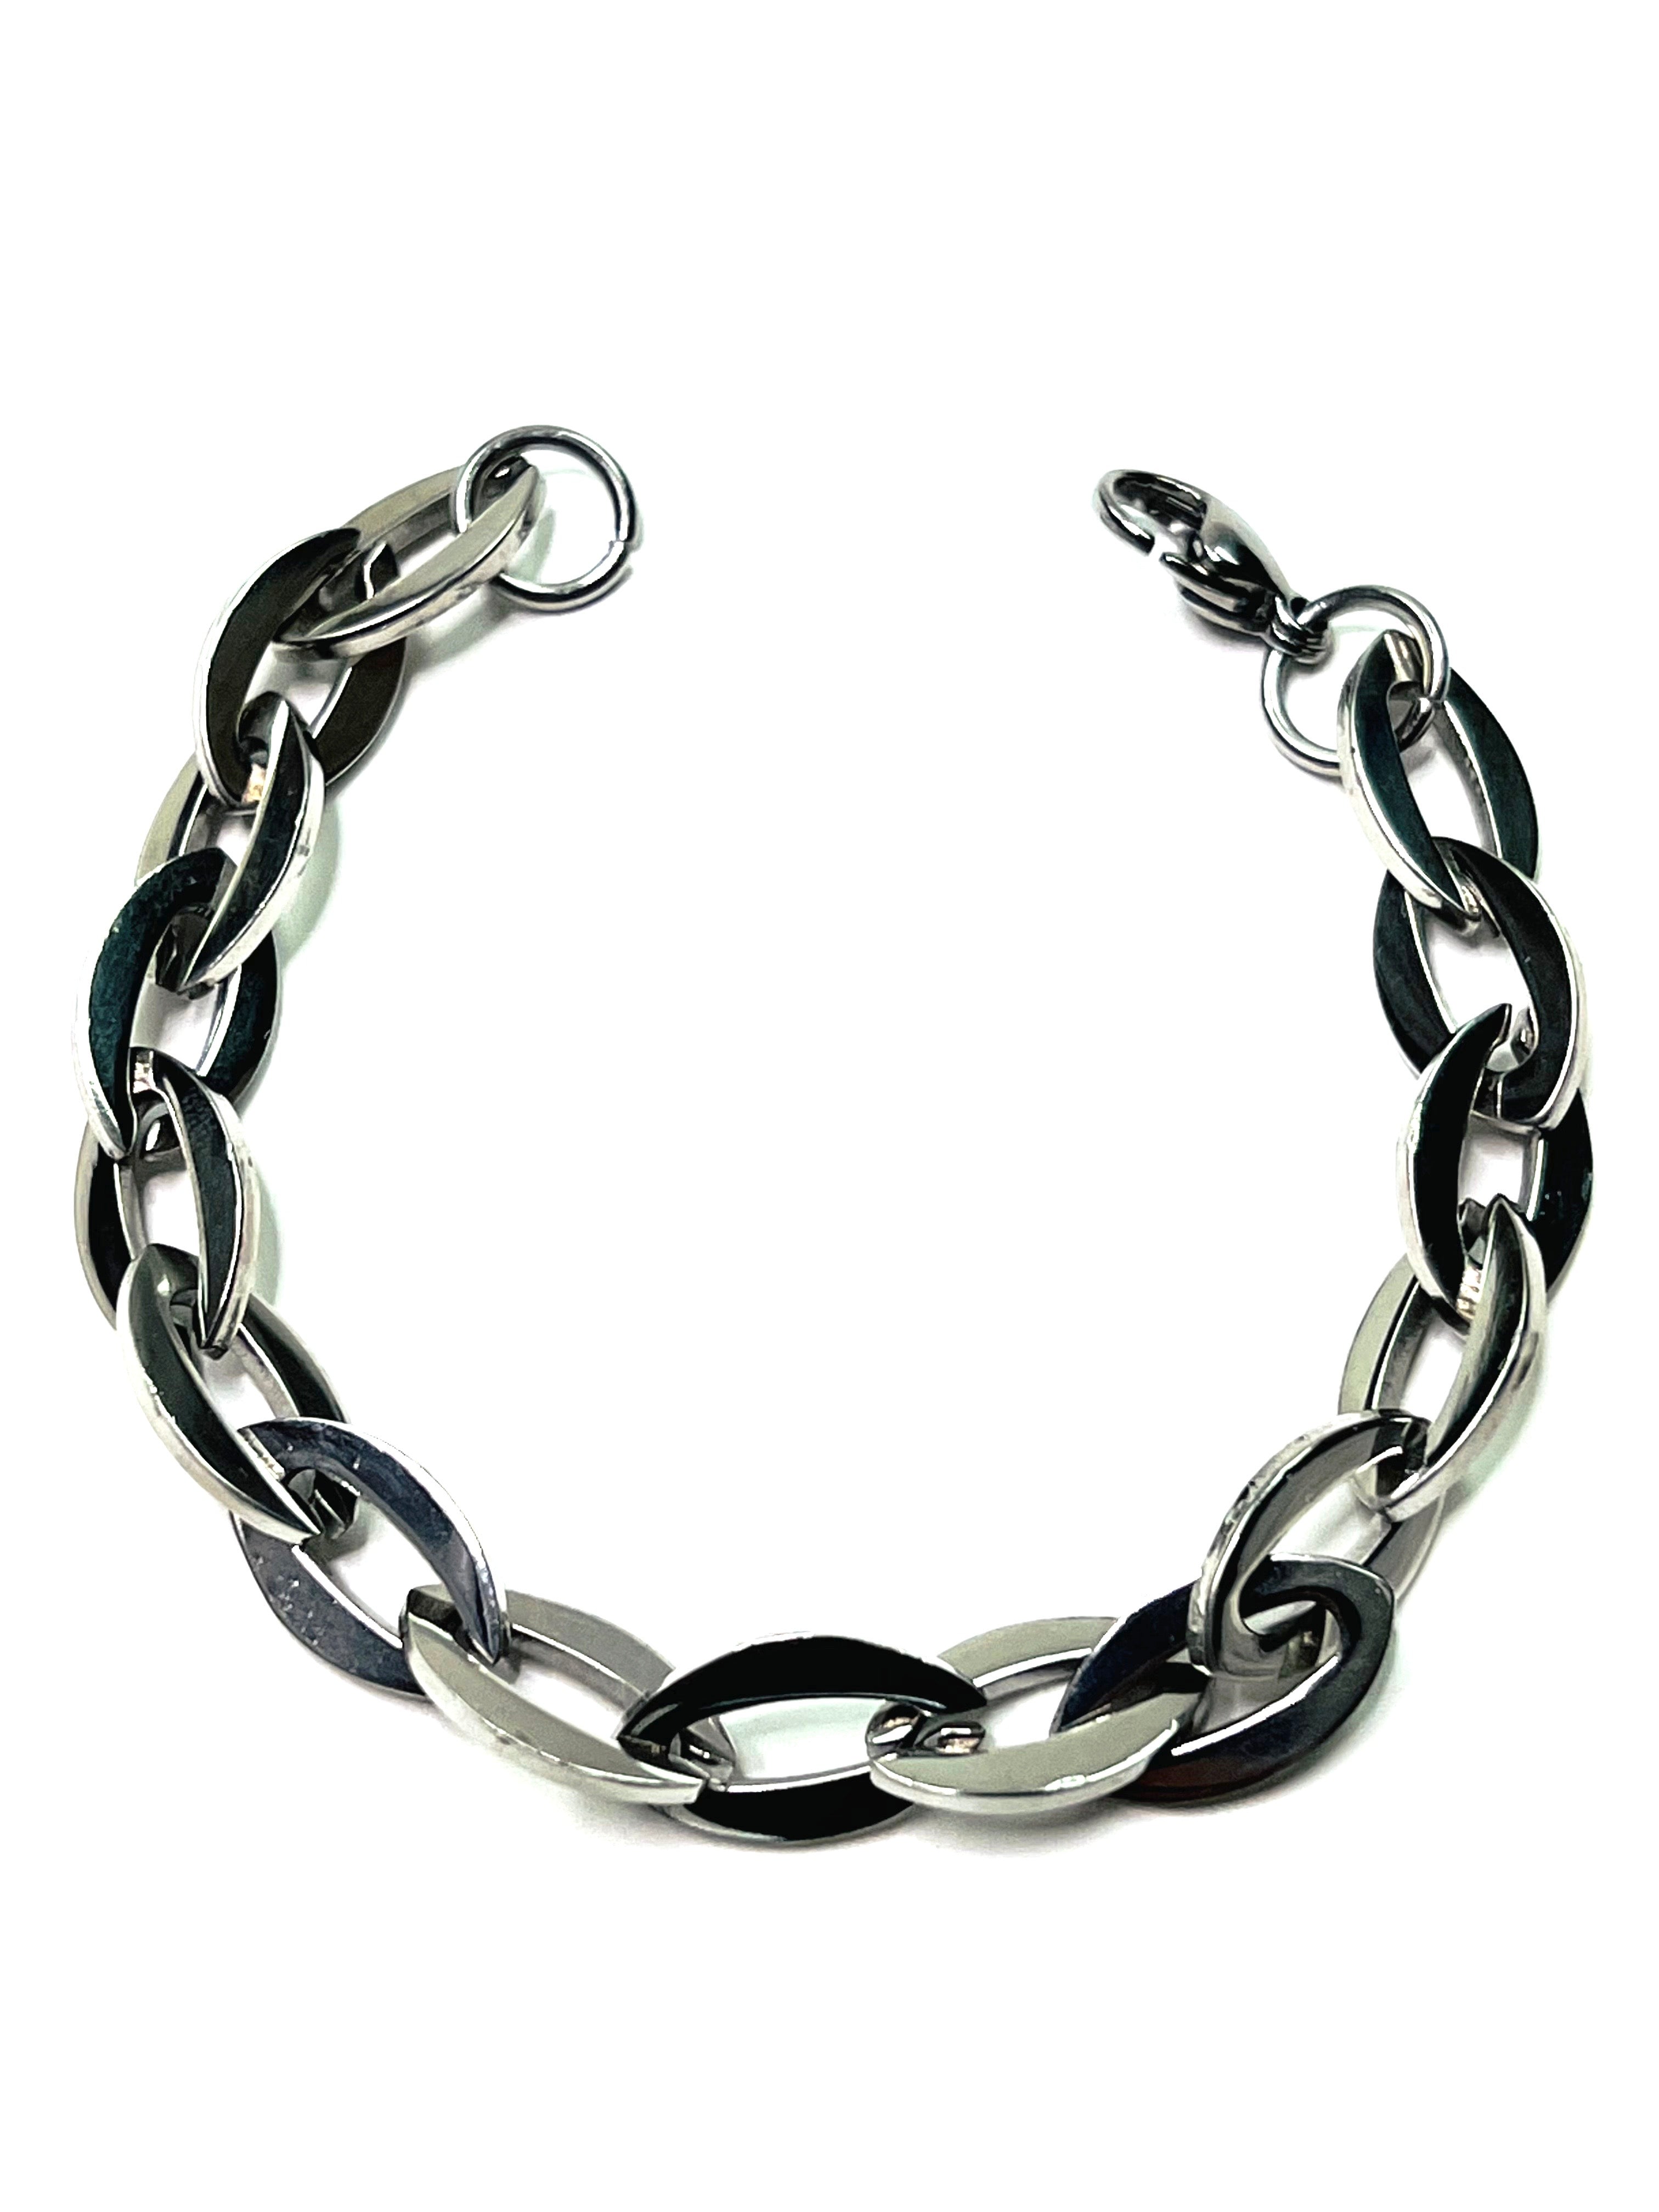 Men’s Stainless Steel Chain Bracelet - Jewellery Unique Gifts & Accessories